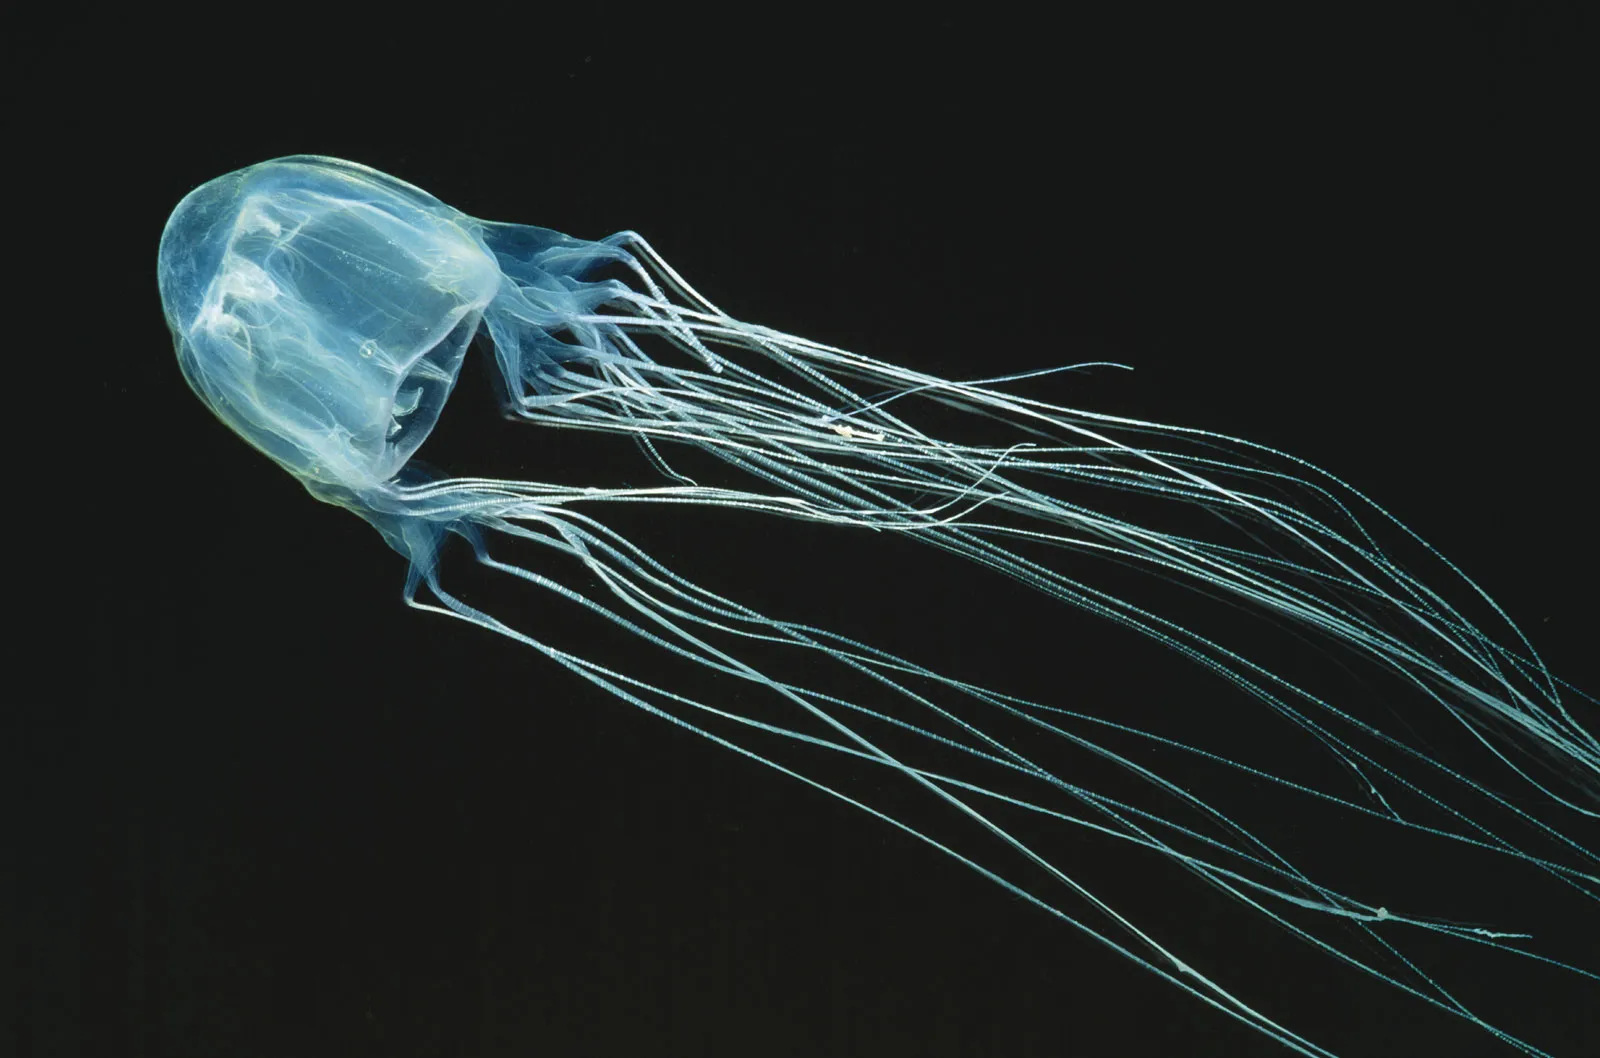 Box Jellyfish Can Swim and See.